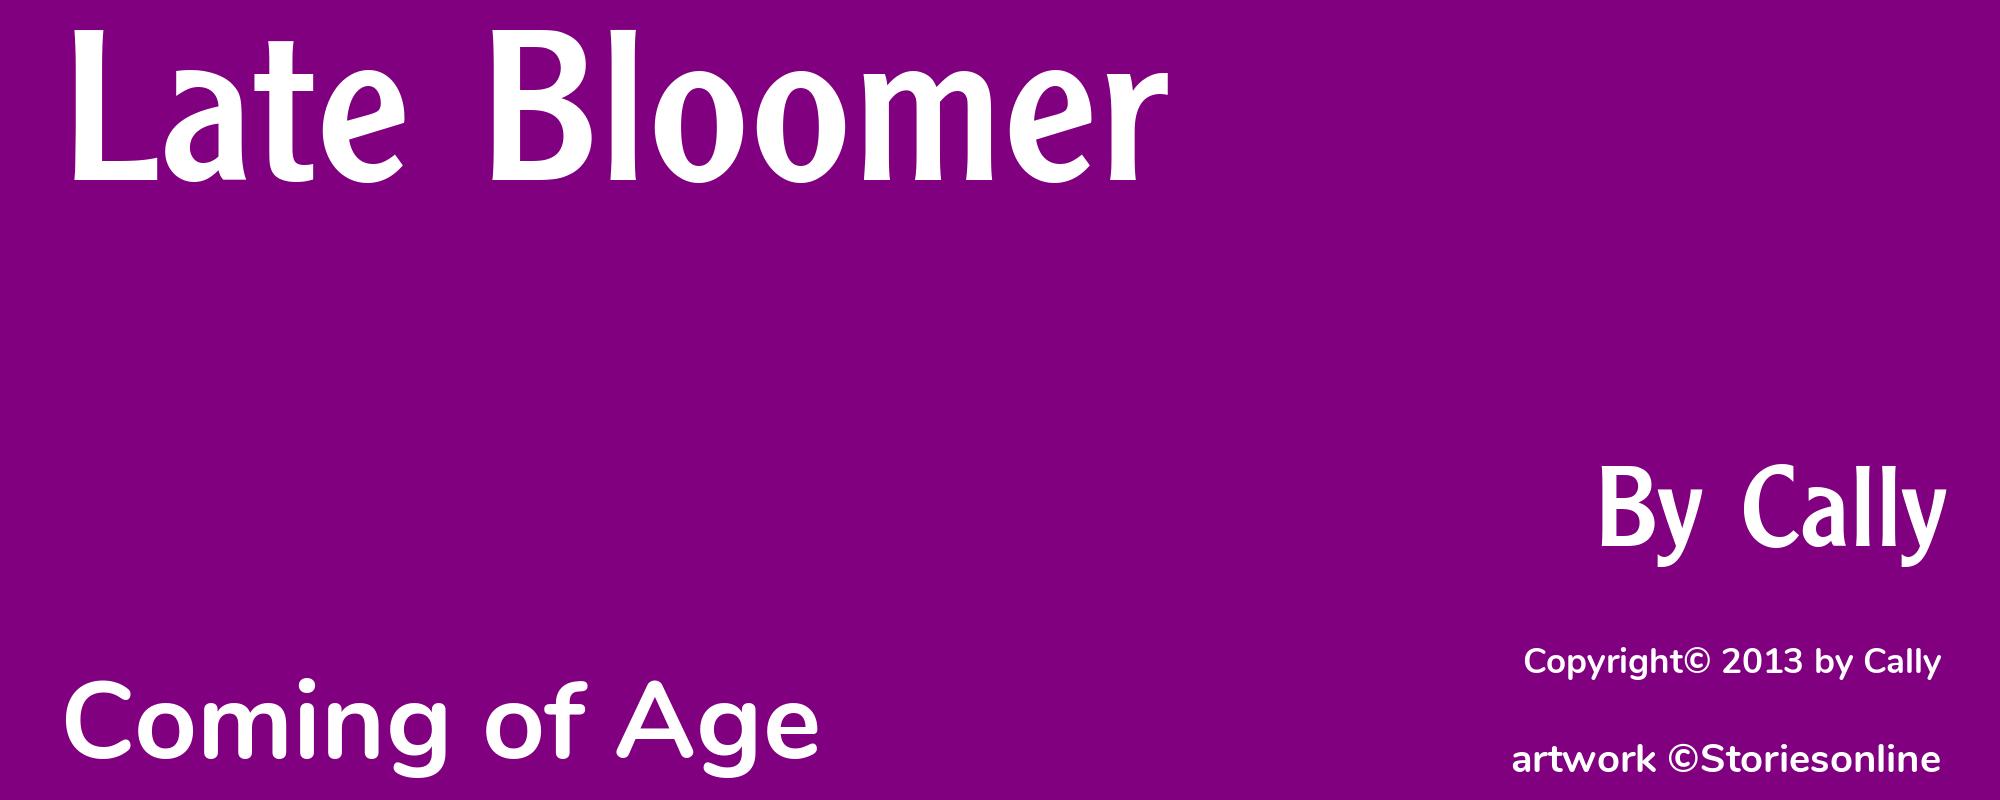 Late Bloomer - Cover